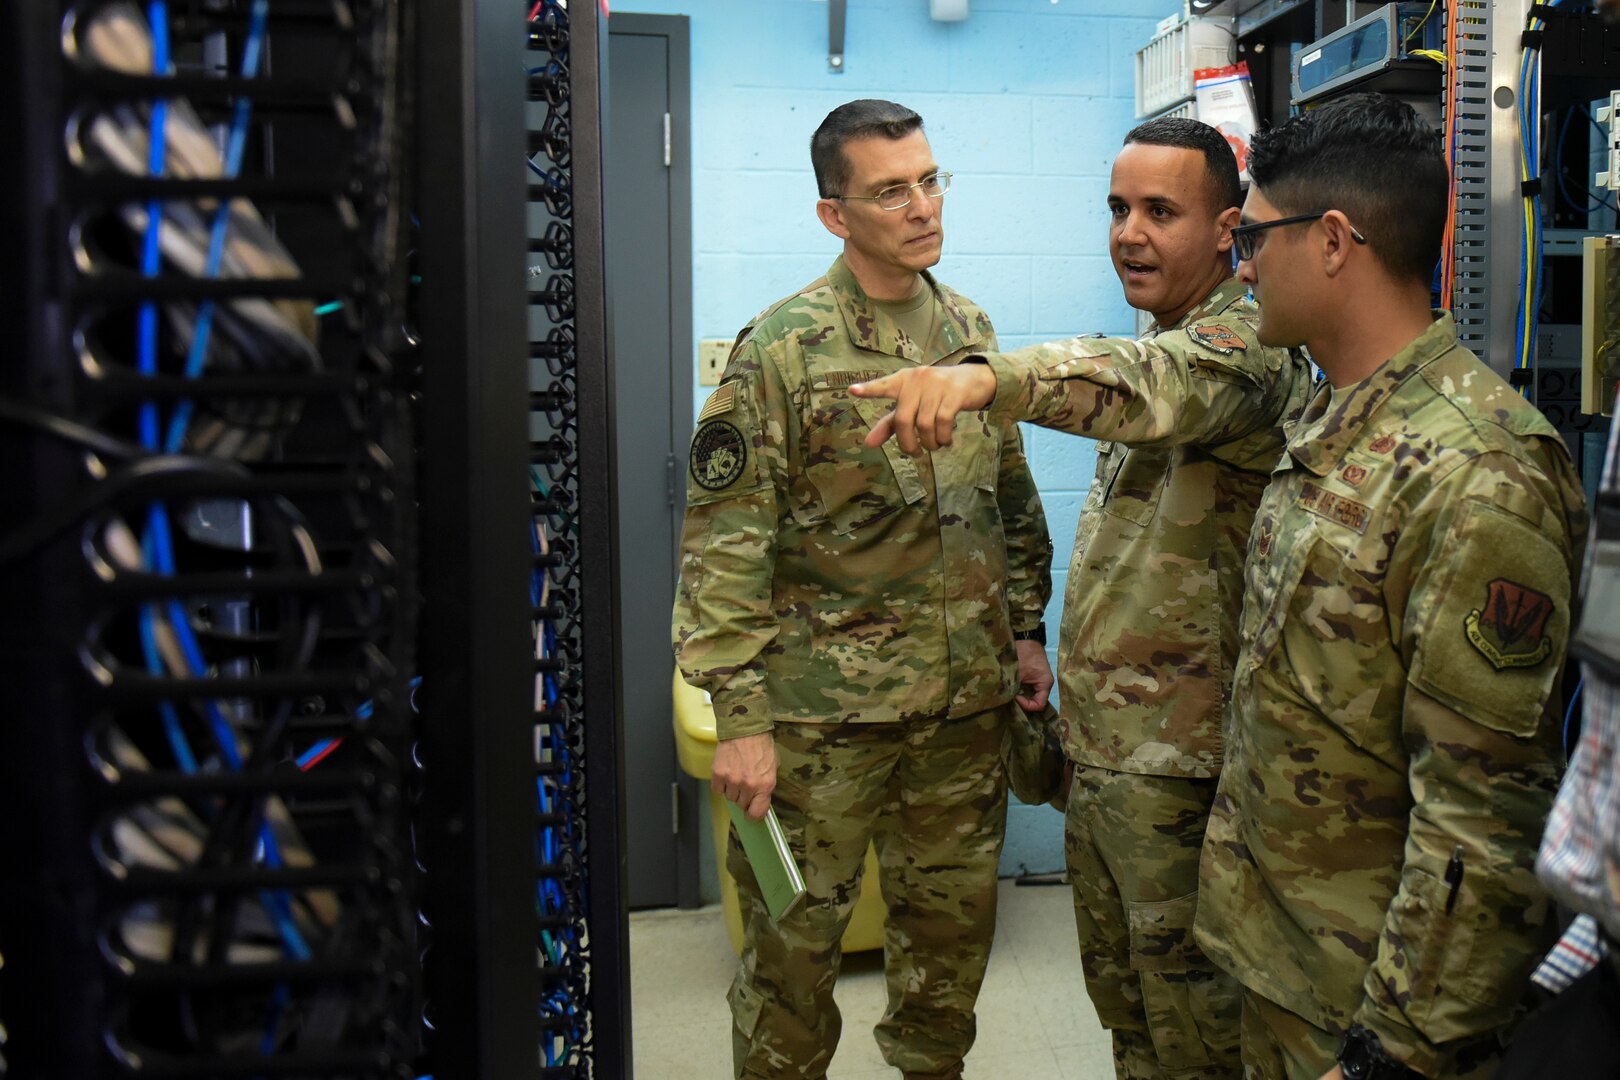 The National Guard Bureau’s A/6 communications directorate team tours the network control center at the 156th Wing, Puerto Rico Air National Guard, Dec. 10, 2019, to assess and finalize plans to move the NCC after the building it's in was severely damaged by Hurricane Maria in 2017.